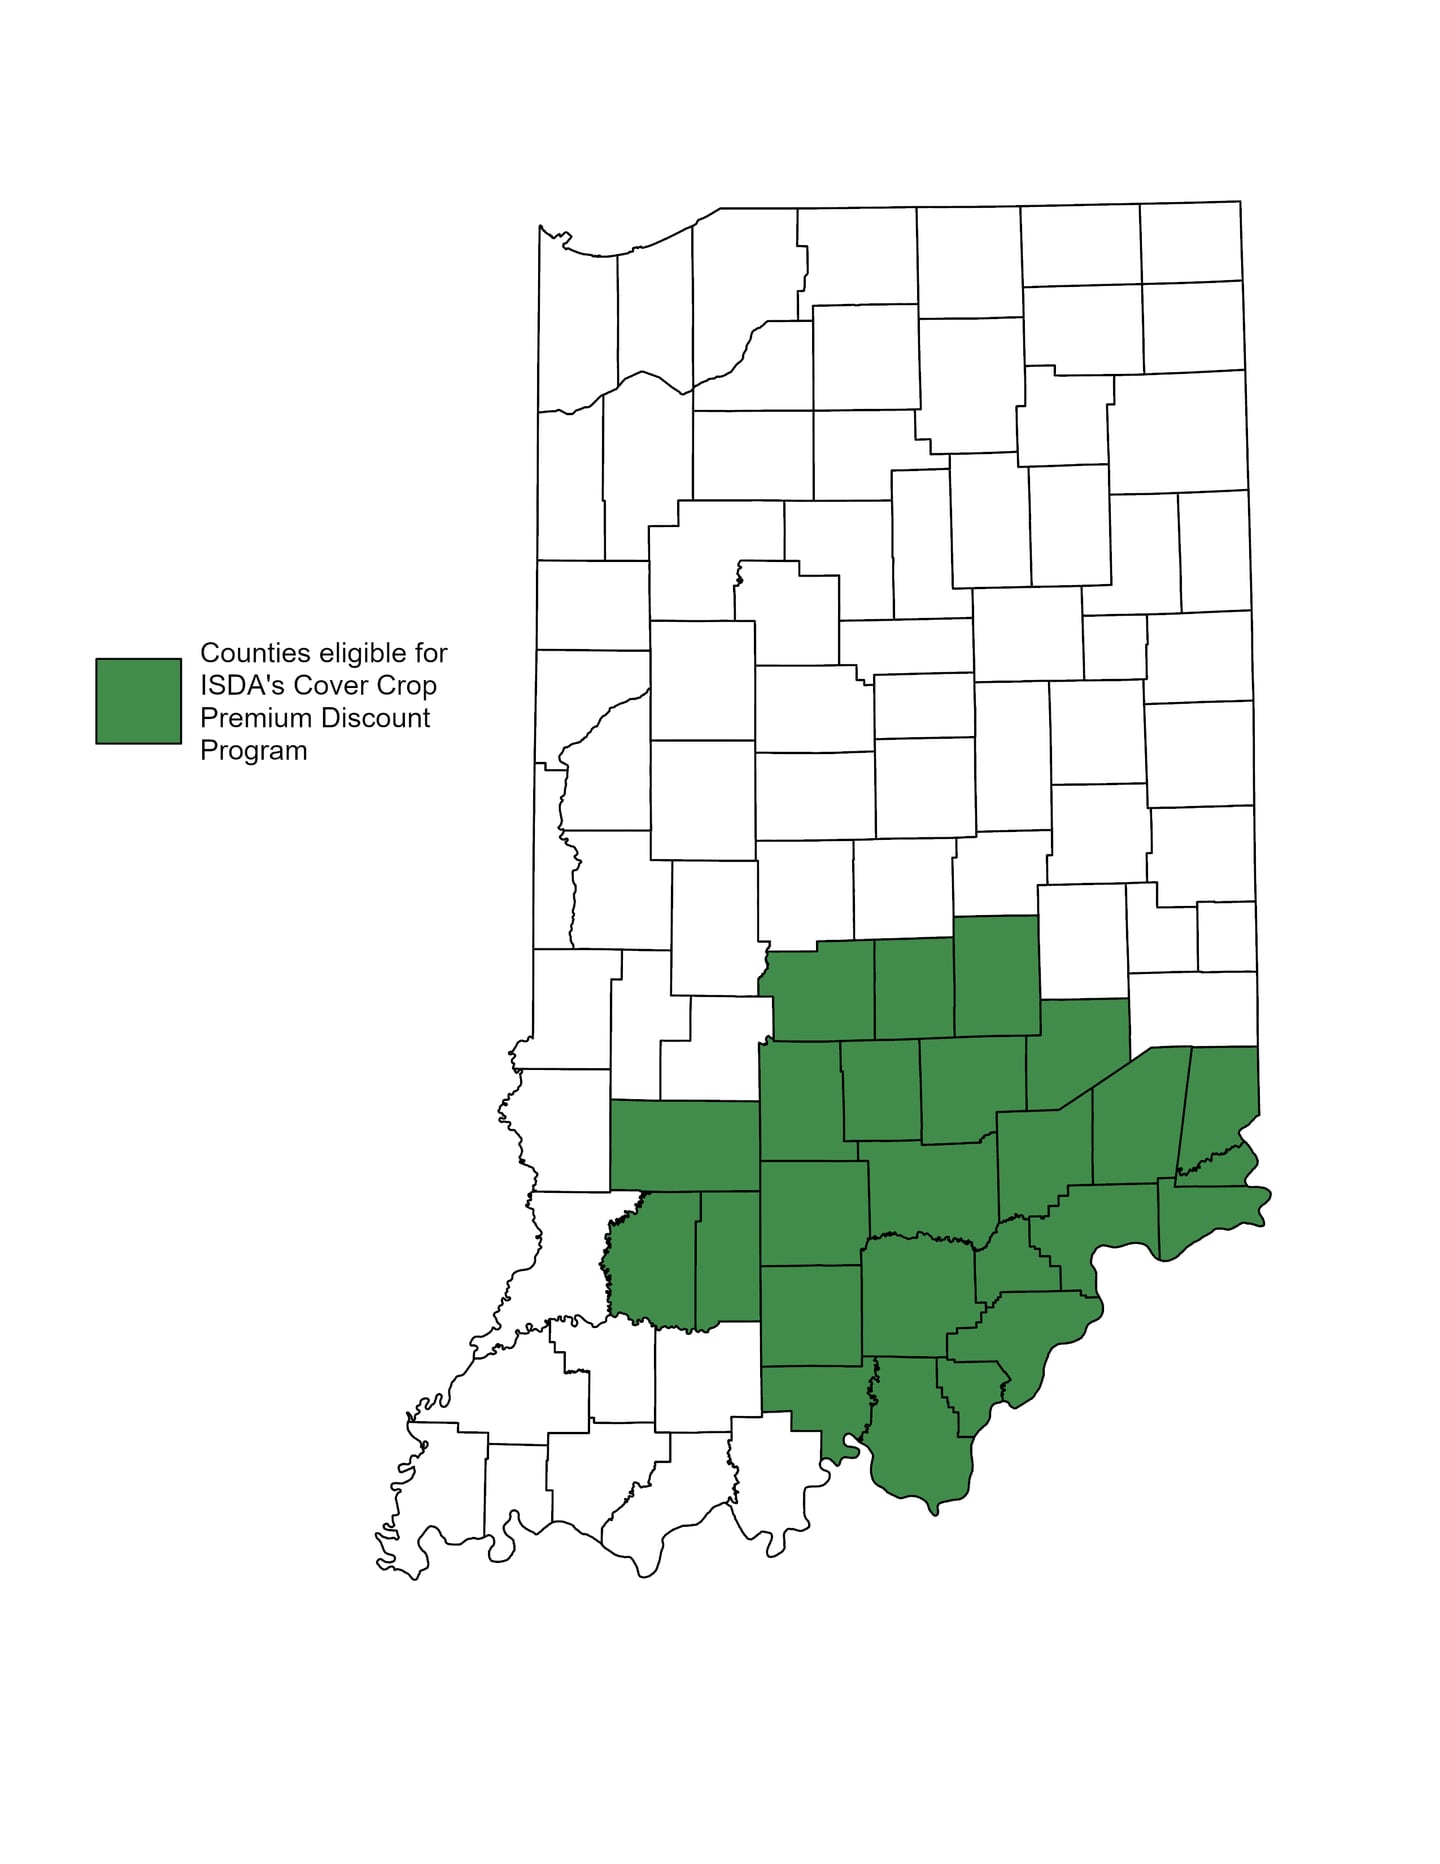 A map shows which counties are eligible for the Cover Crop Premium Discount Program in Indiana.